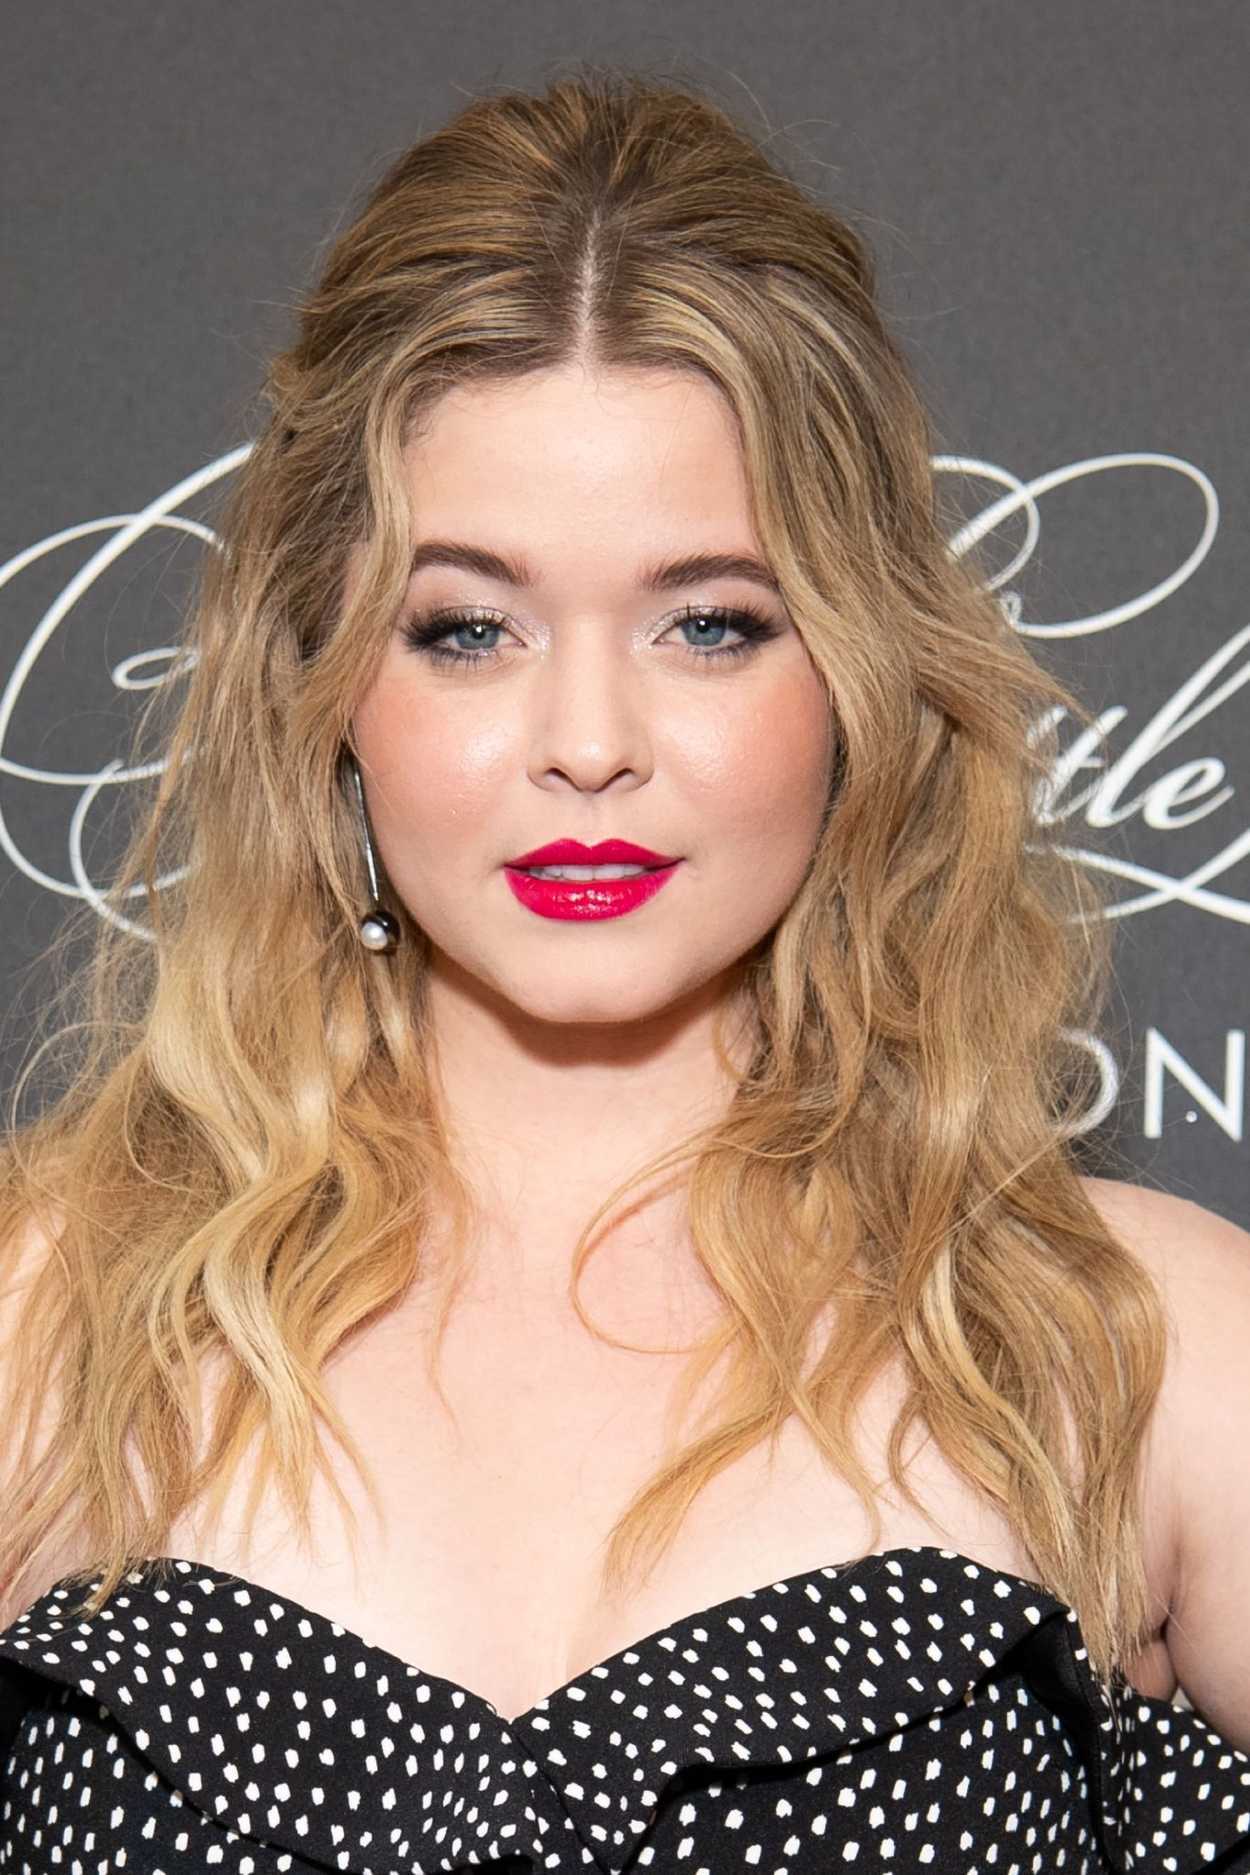 The 23-year-old actress Sasha Pieterse attends the "Pretty Little Liar...